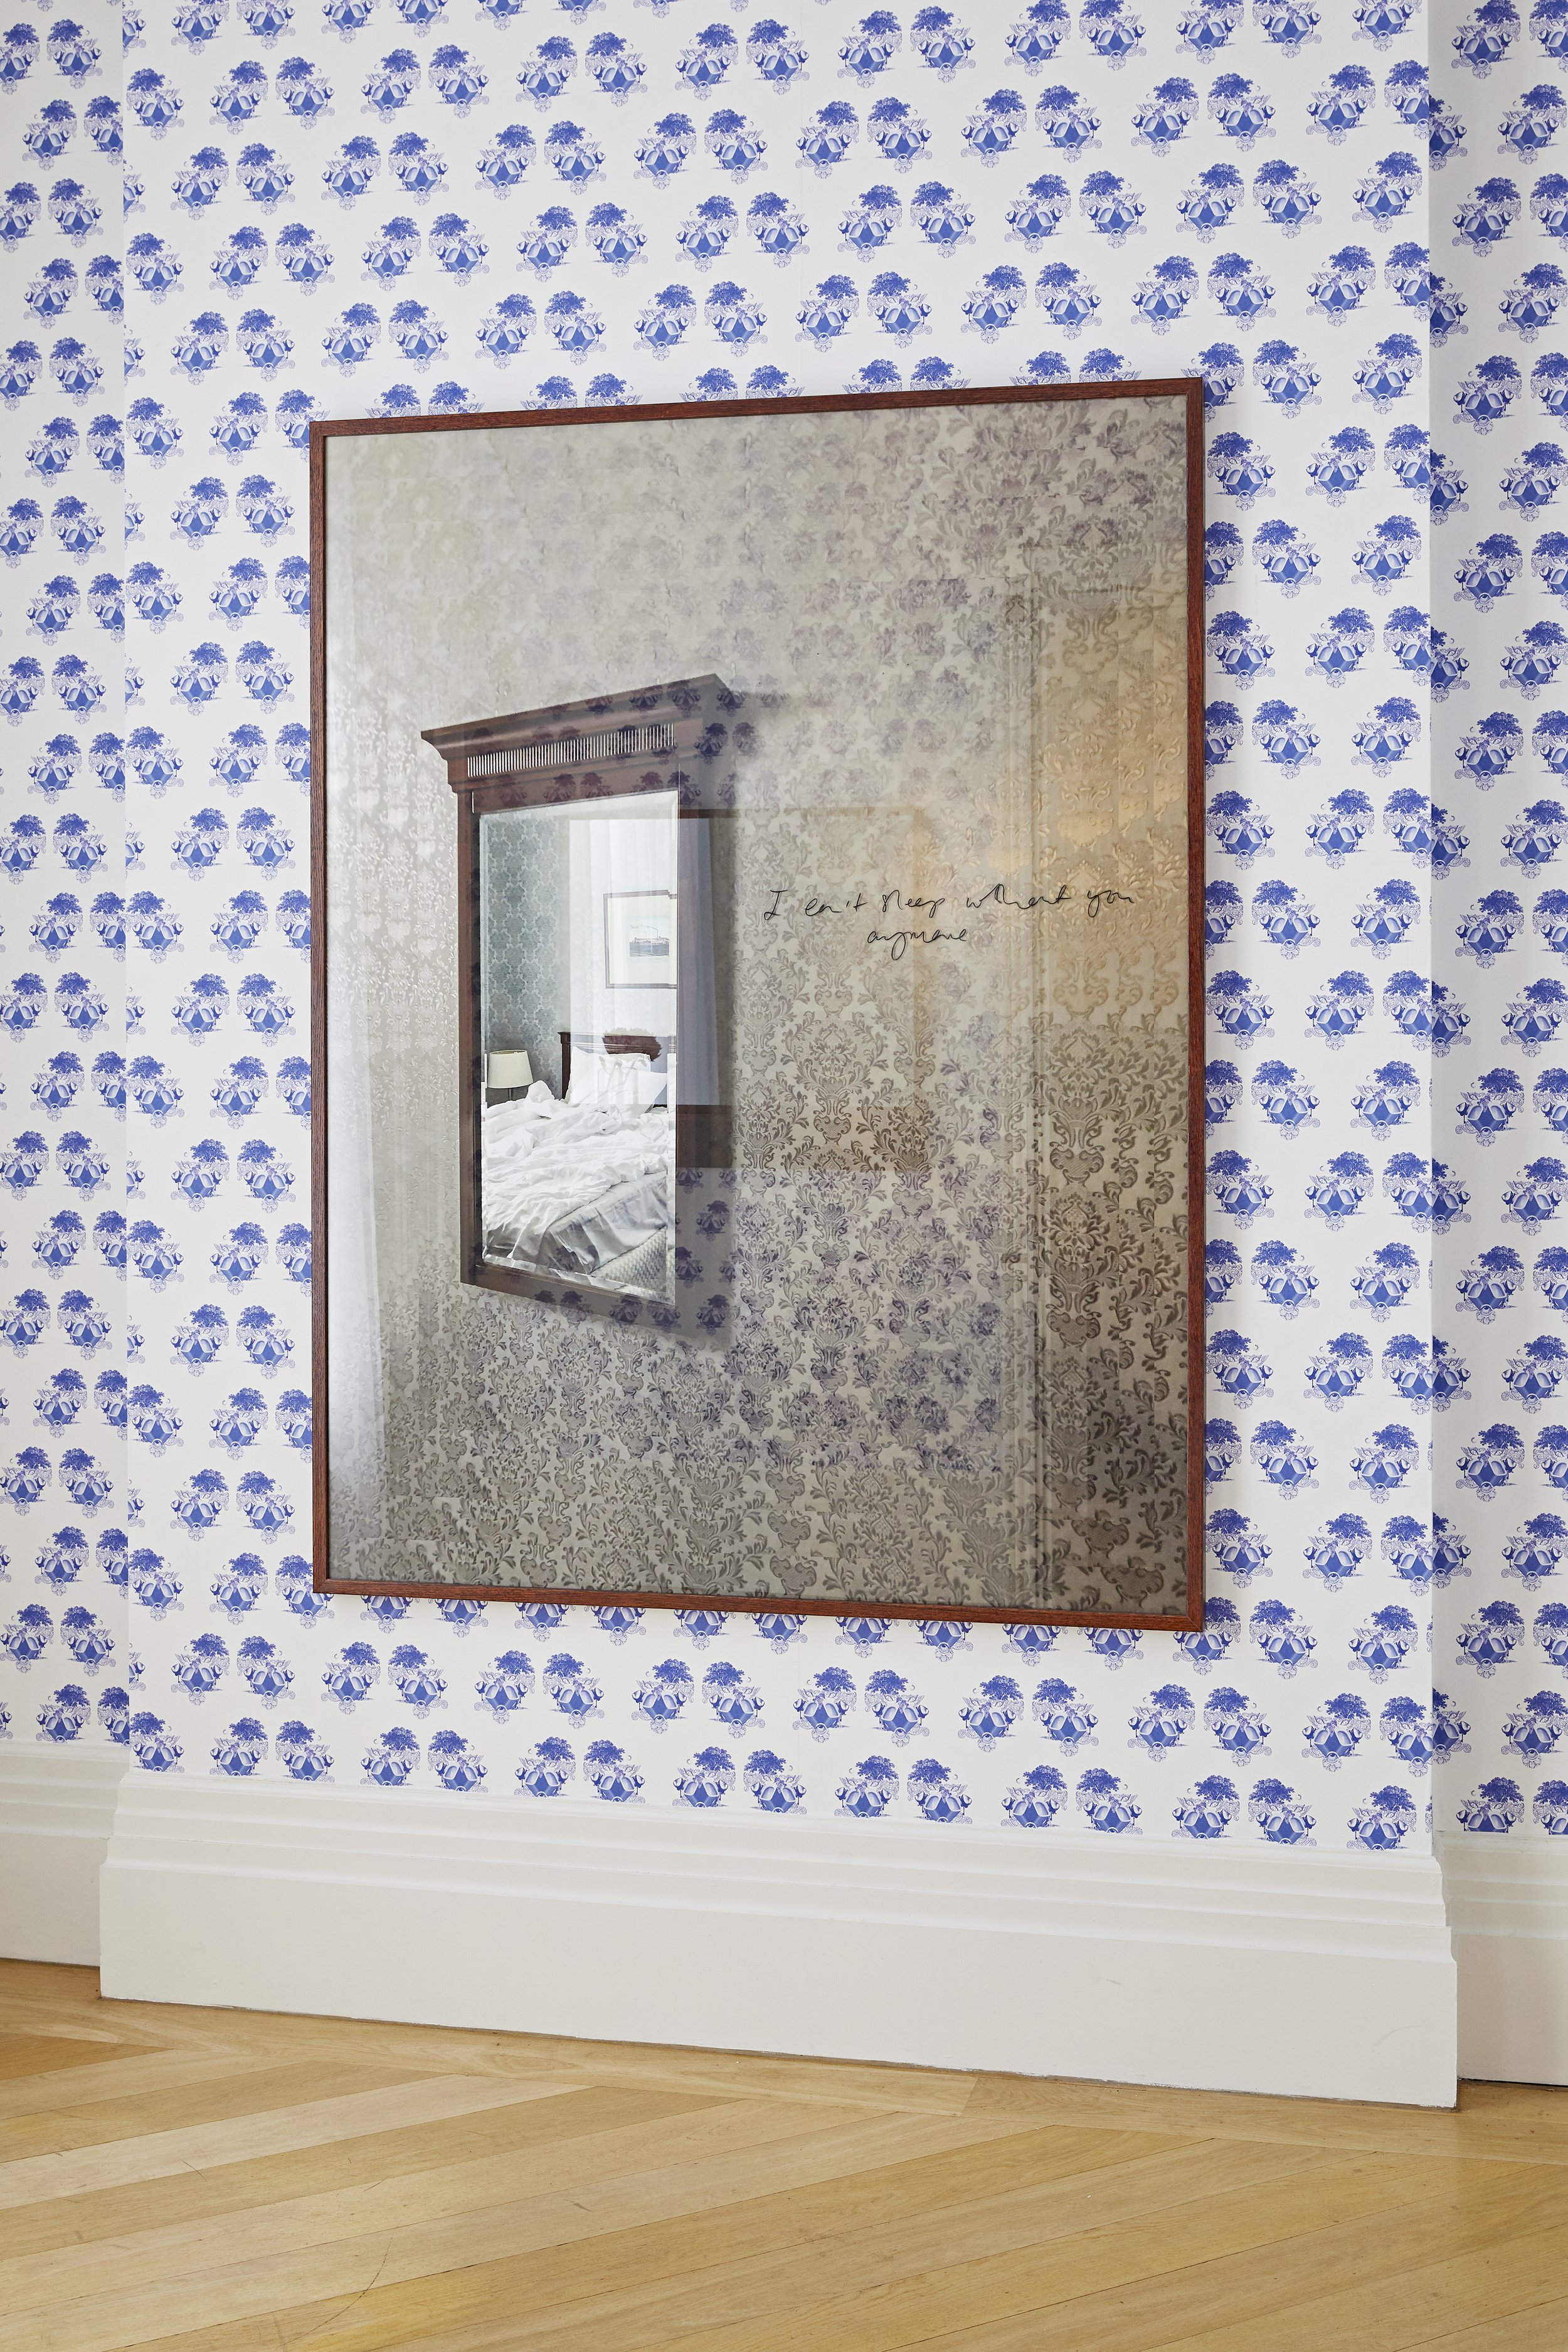  Untitled (entrance), wallpaper, wood, framed giclee photo rag print 180cm x 135cm, handwritten sentence, 2022.   Installation shot from Fantasies on a Found Phone, Dedicated to the Man Who Lost it, The Mosaic Rooms, London 2022.  